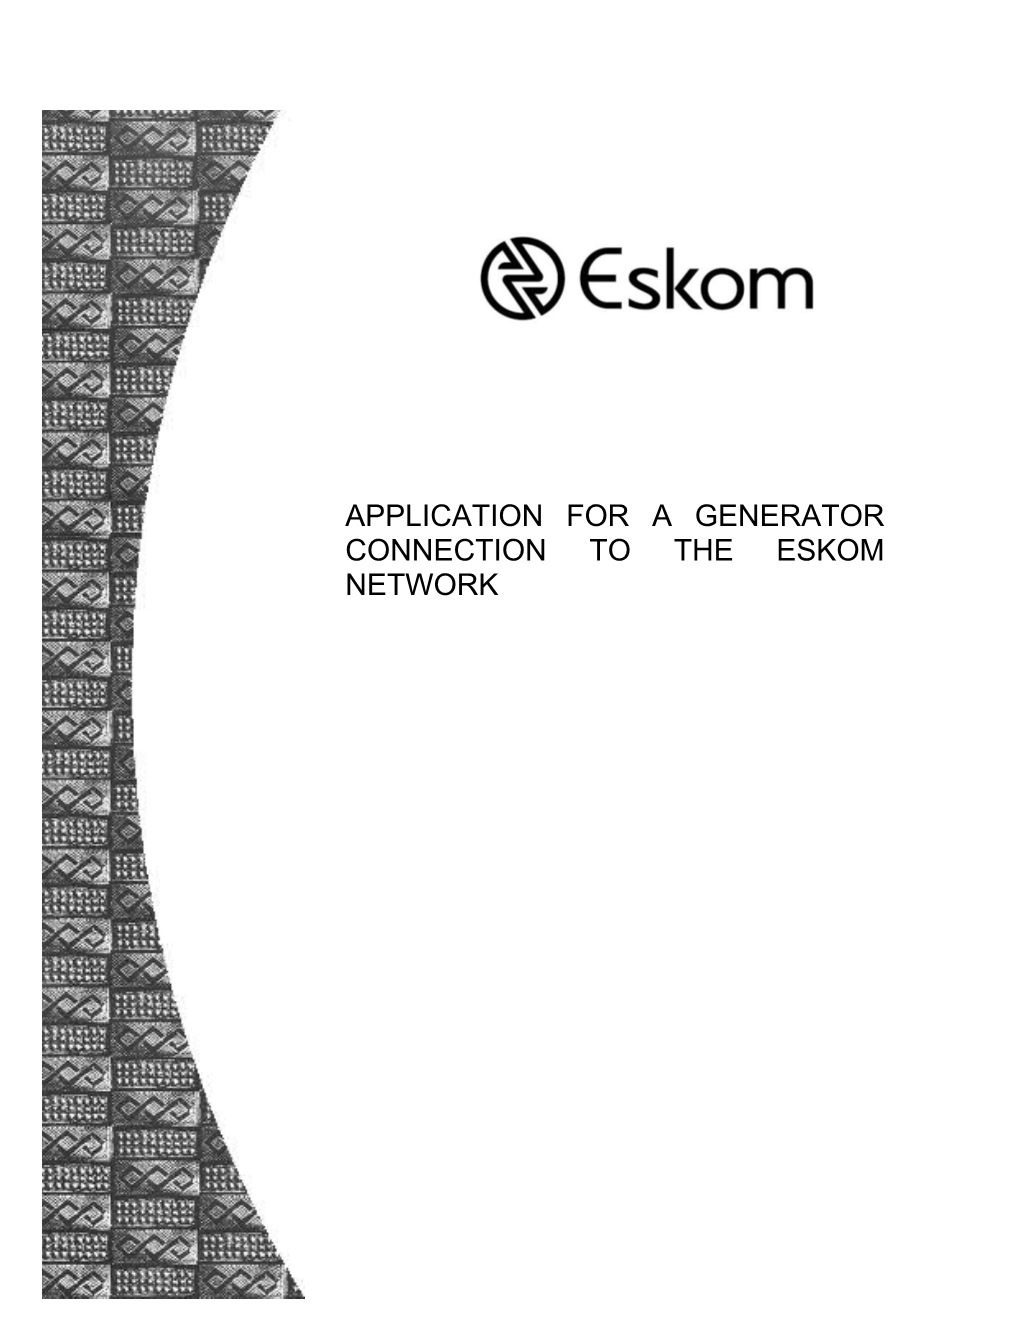 Applicationfor a Generator Connectionto the Eskom Network